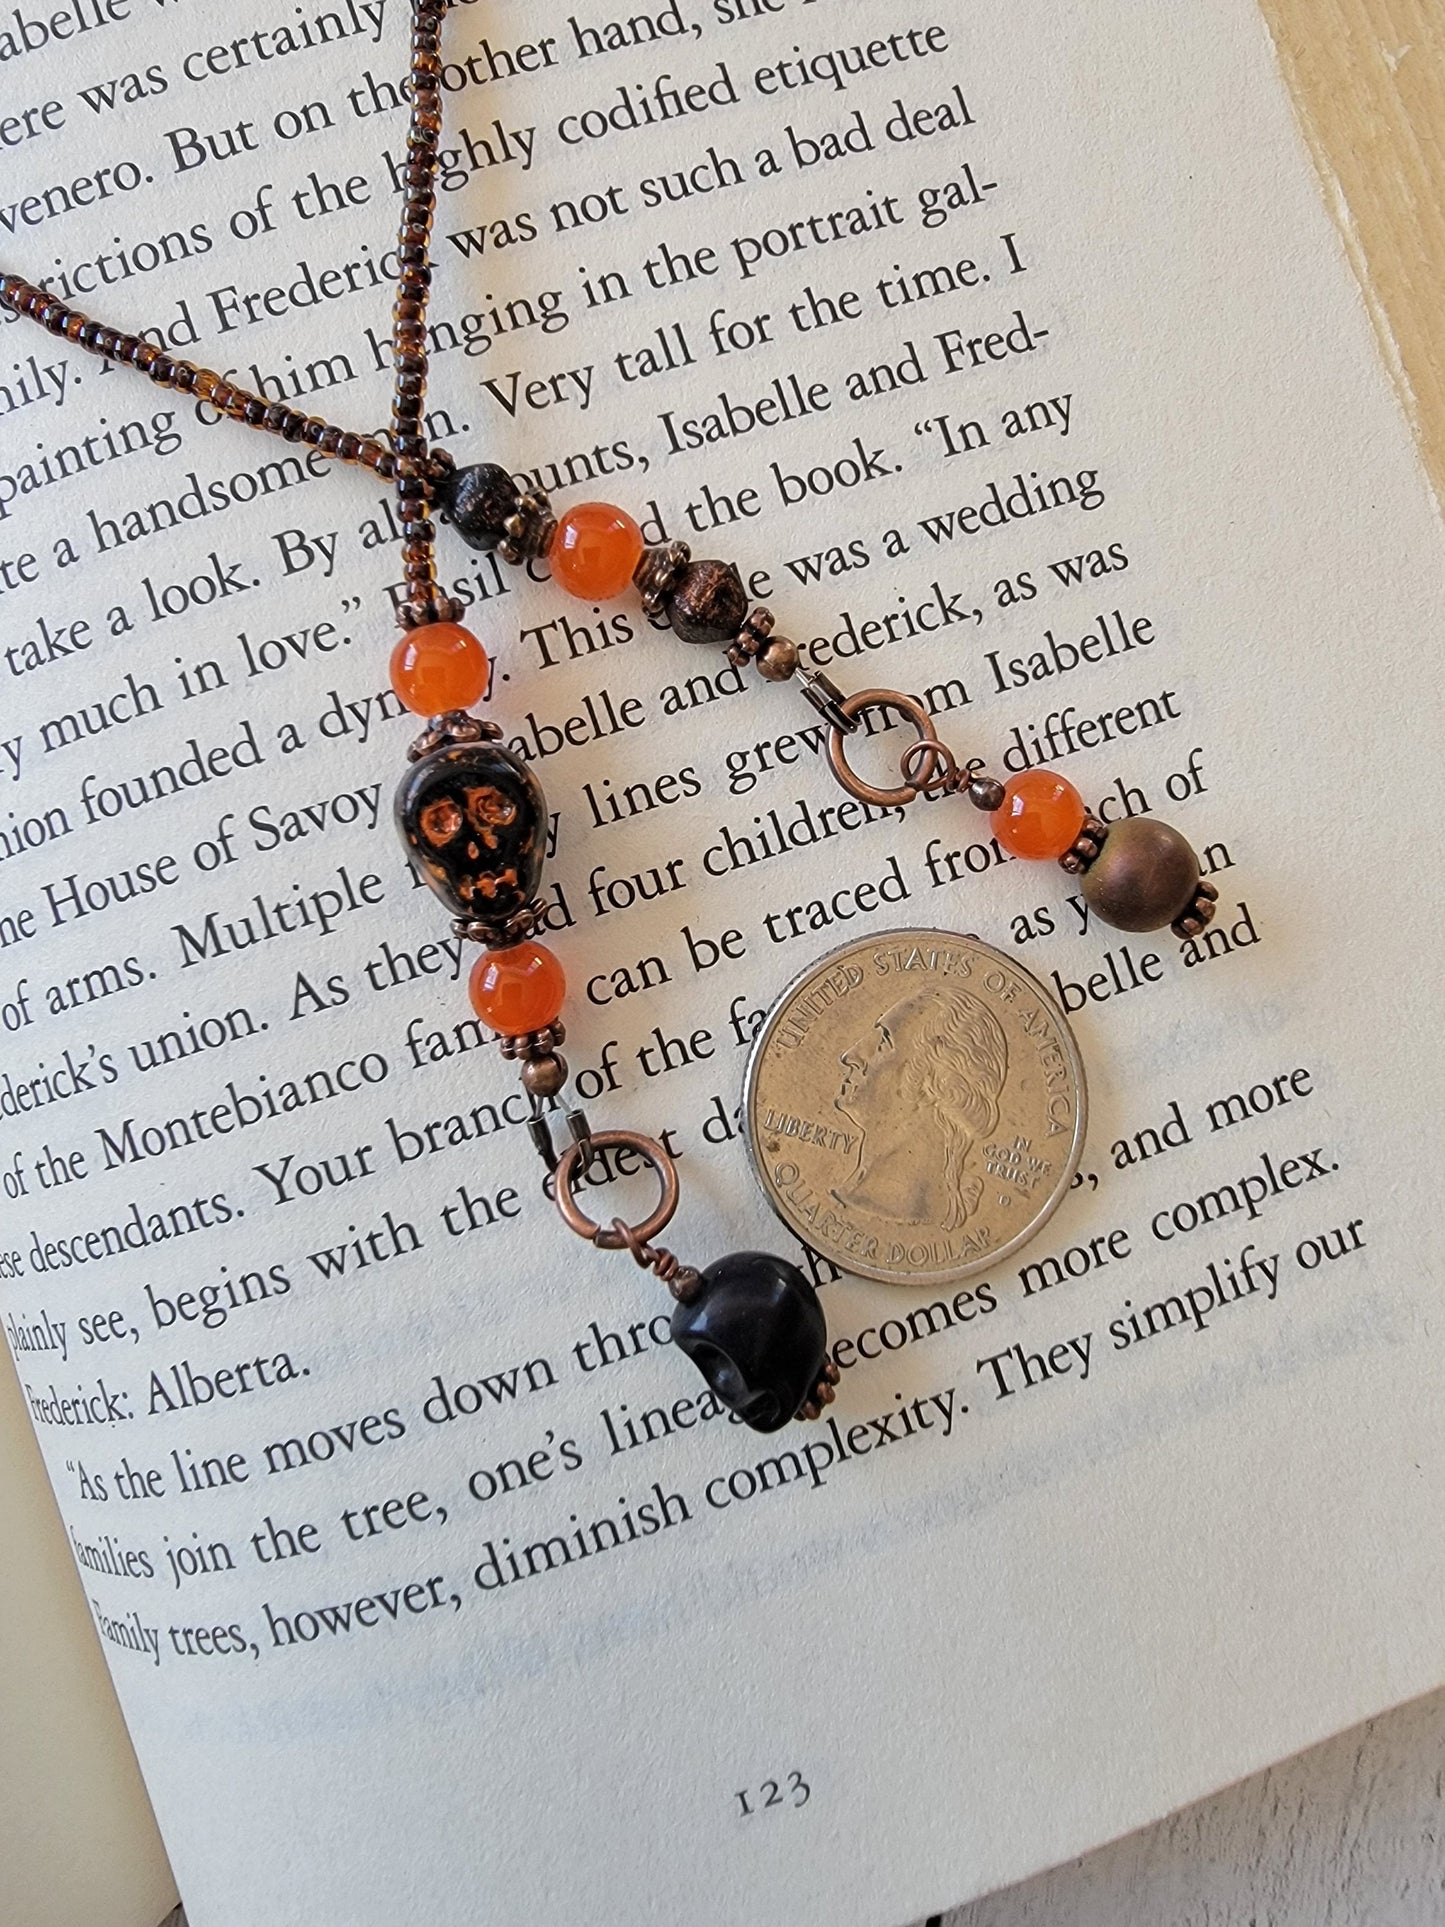 Cute Macabre Black and Orange Beaded Bookmark with Cute Glass Skull Bead - Add a Touch of Spooky Charm